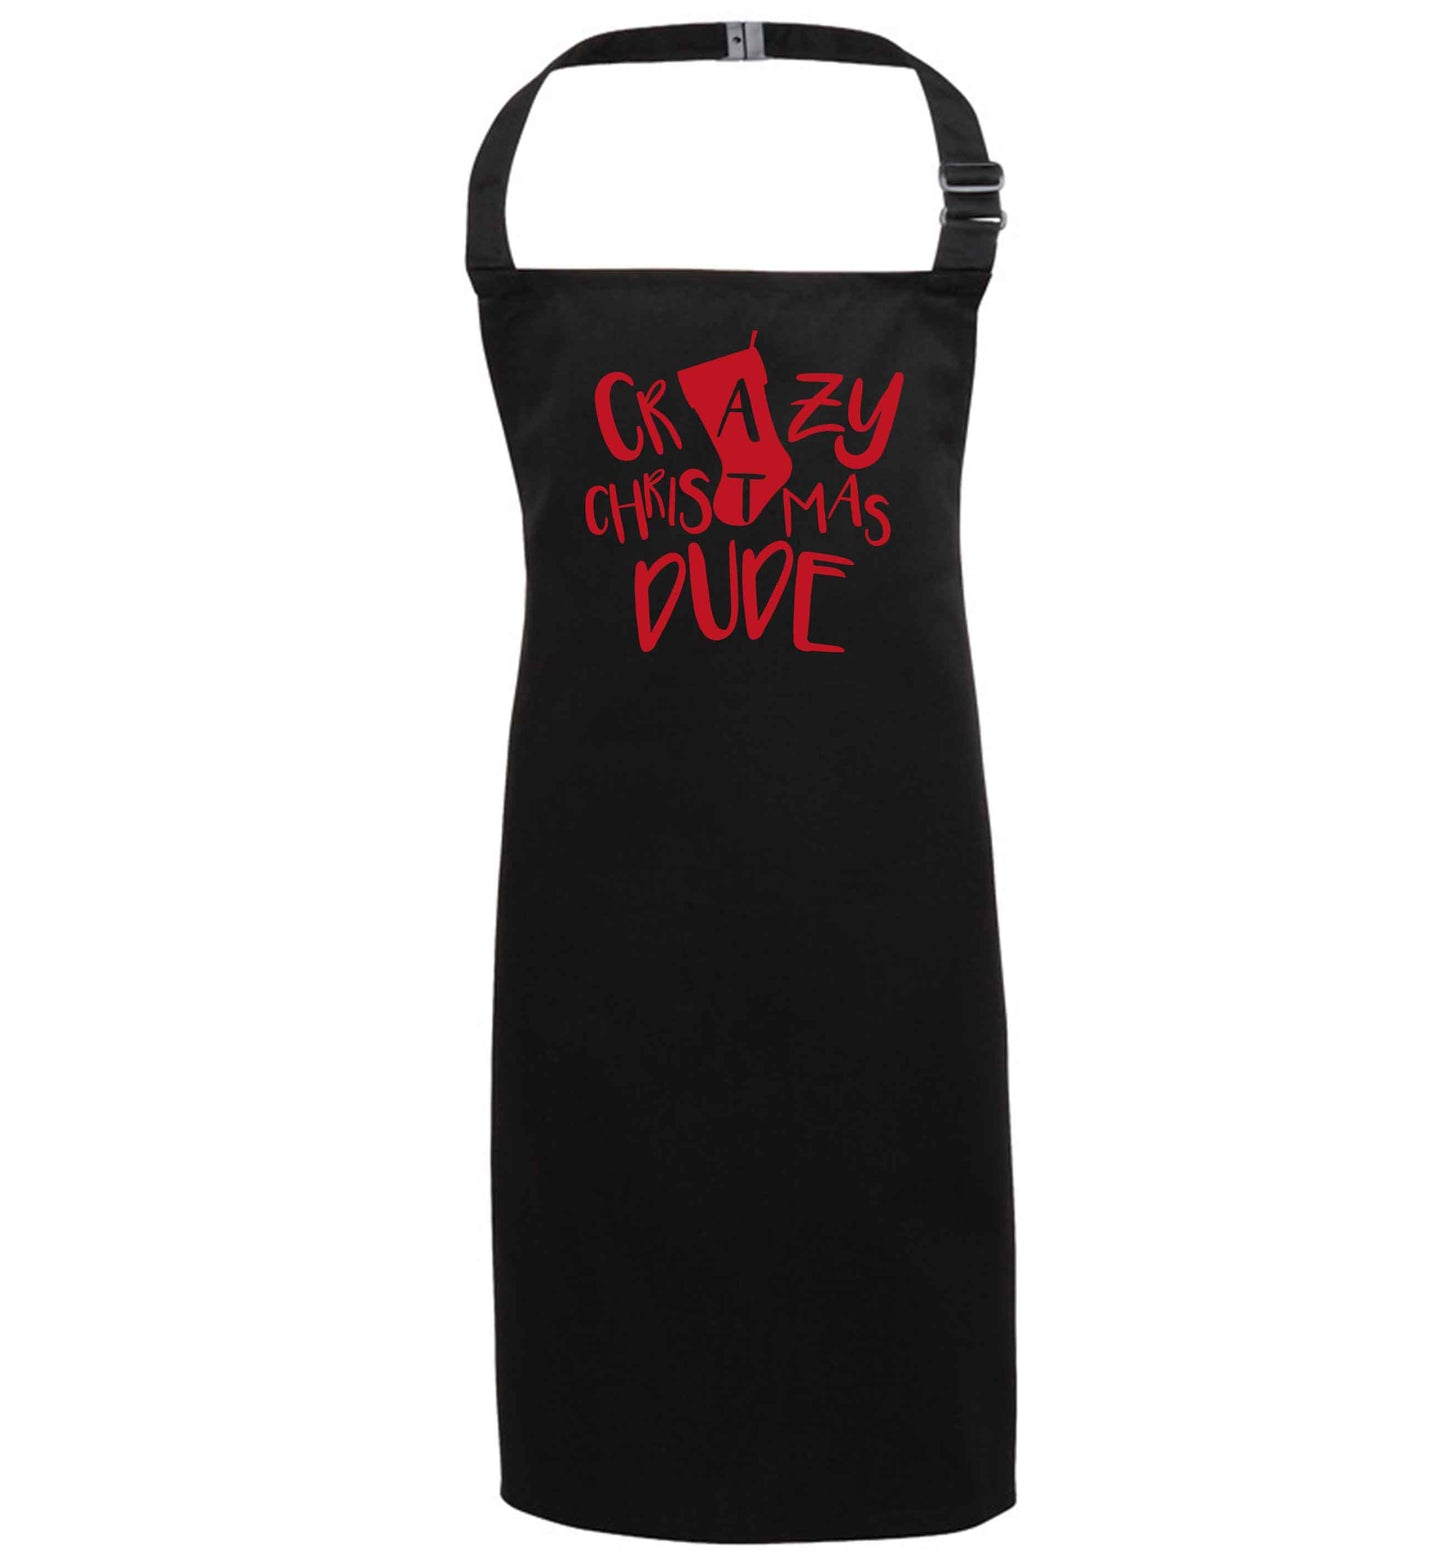 Crazy Christmas Dude black apron 7-10 years